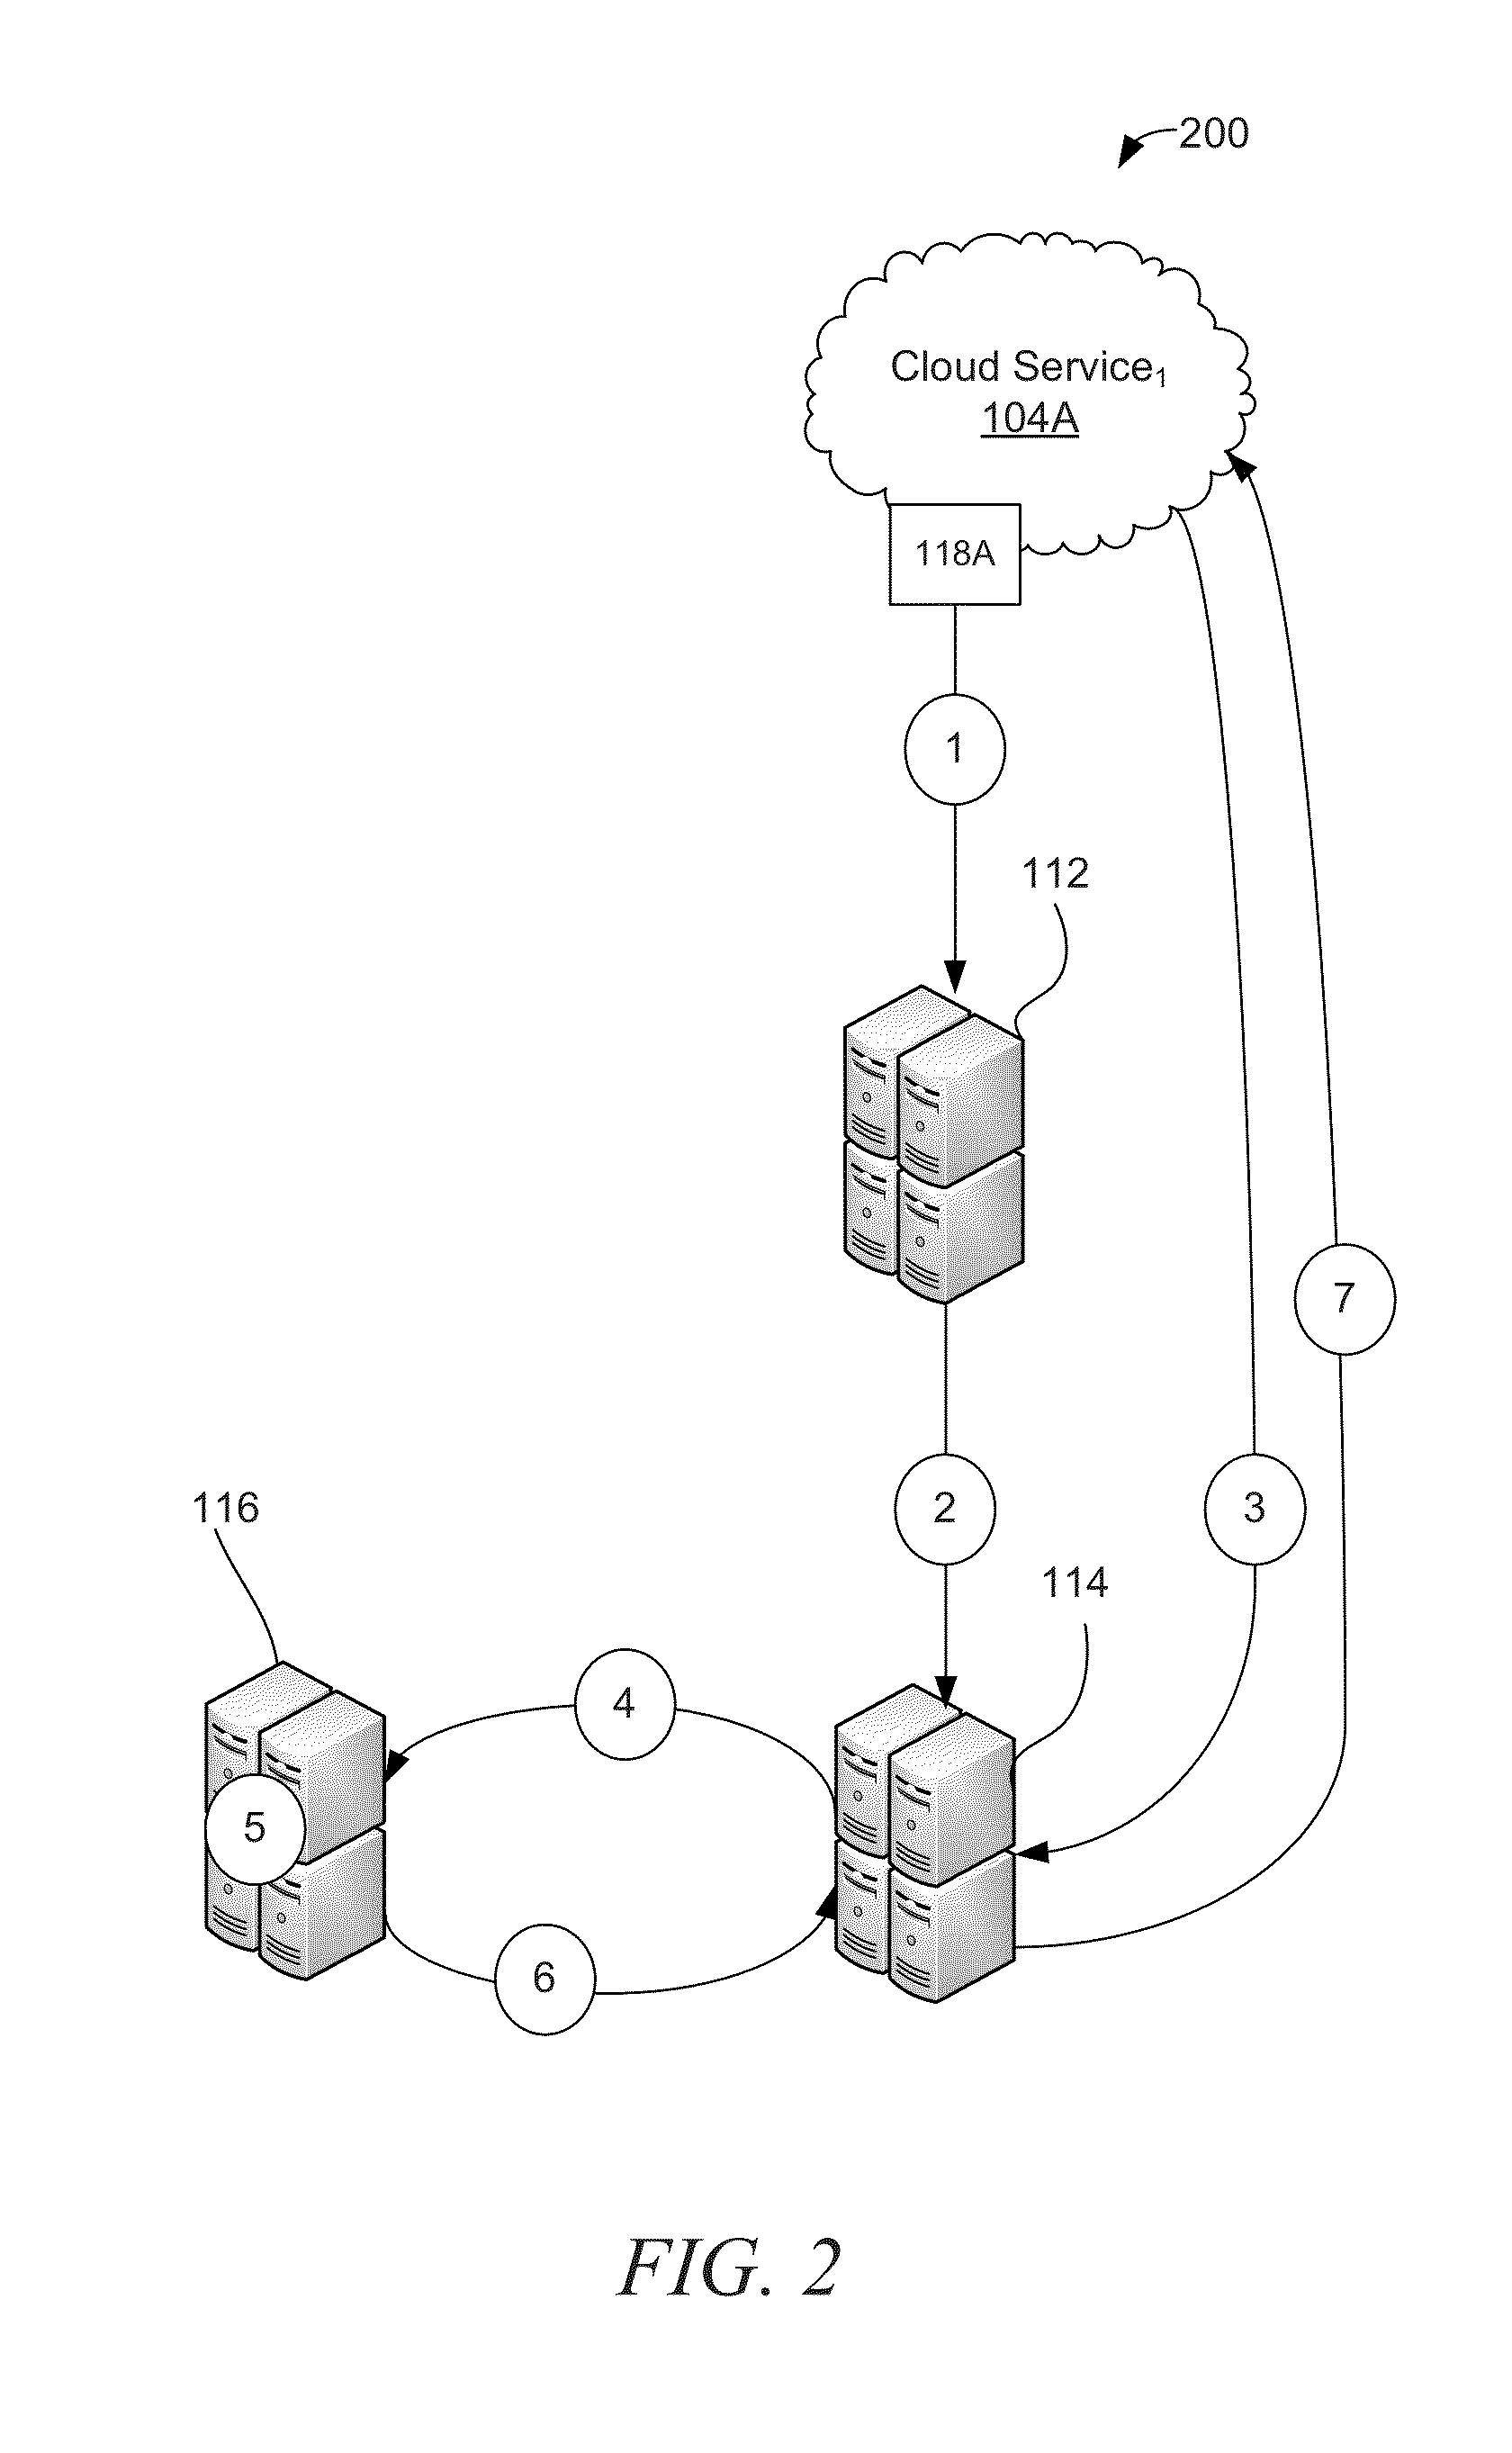 Systems and methods for cloud data loss prevention integration